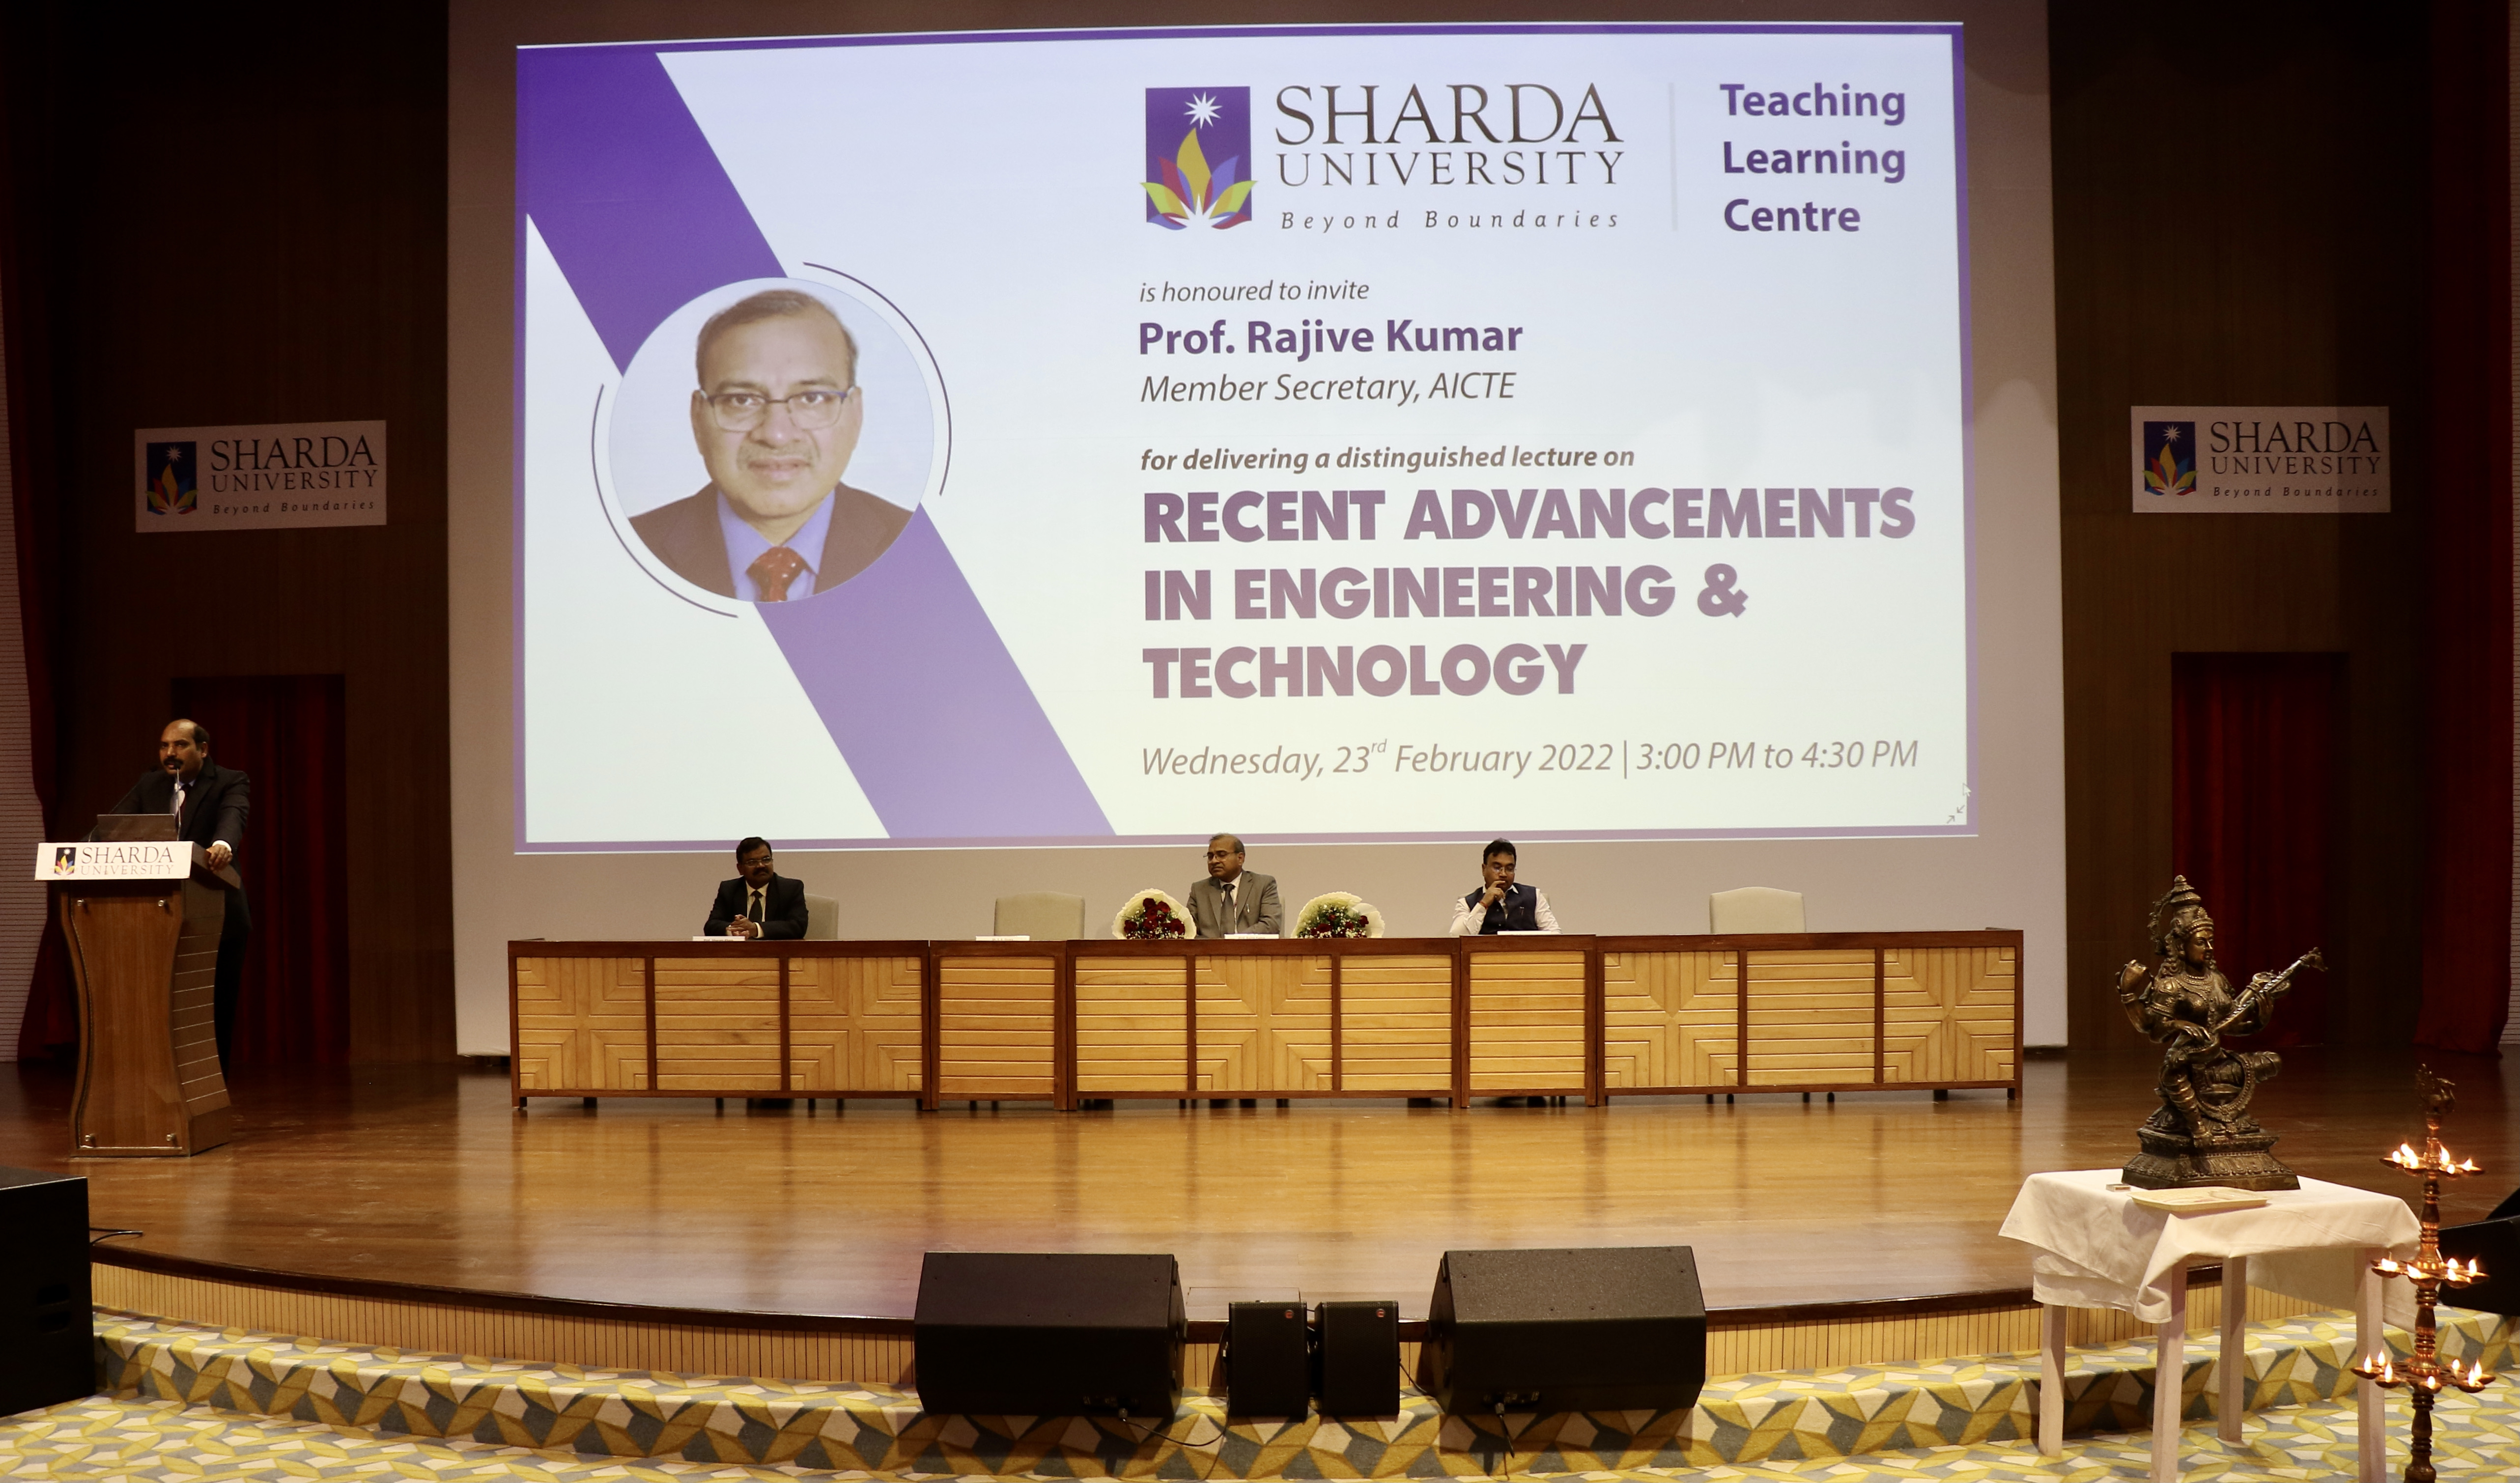 Seminar on 'Recent Advancements in Engineering and Technology organised by Sharda University